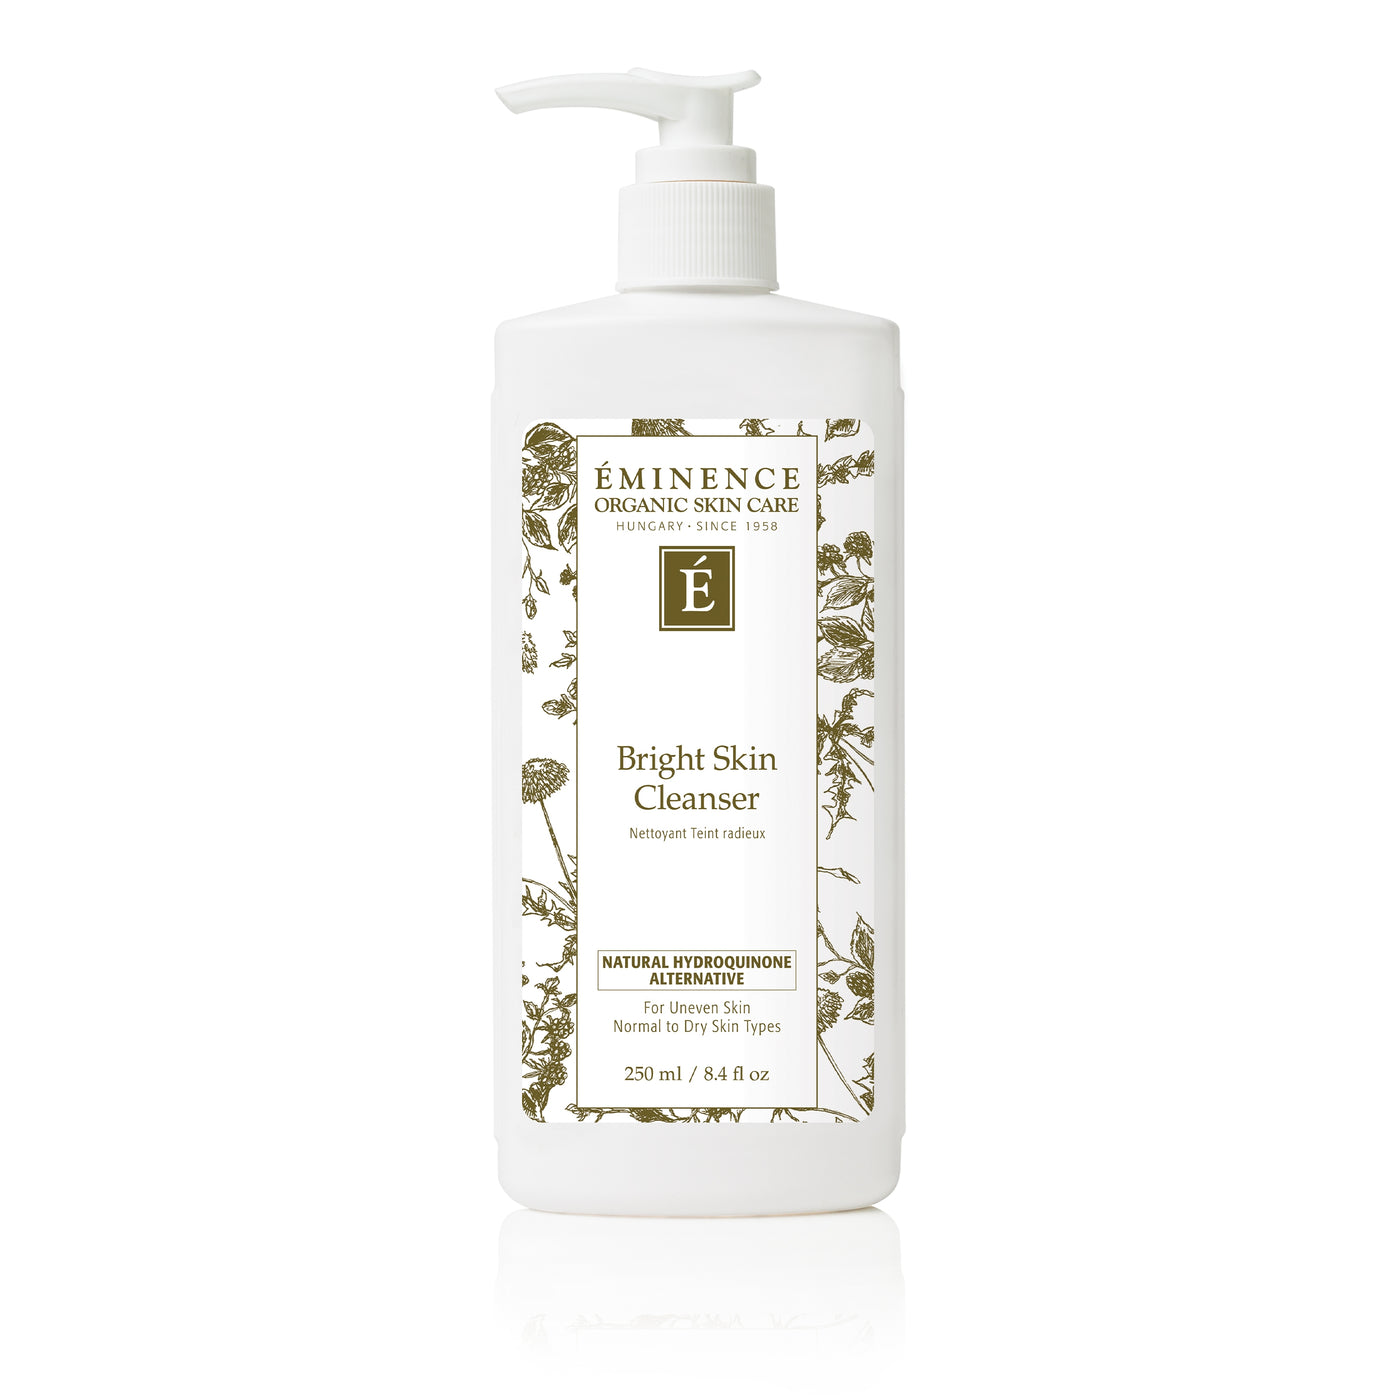 Eminence Organics Bright Skin Cleanser - Radiance Clean Beauty